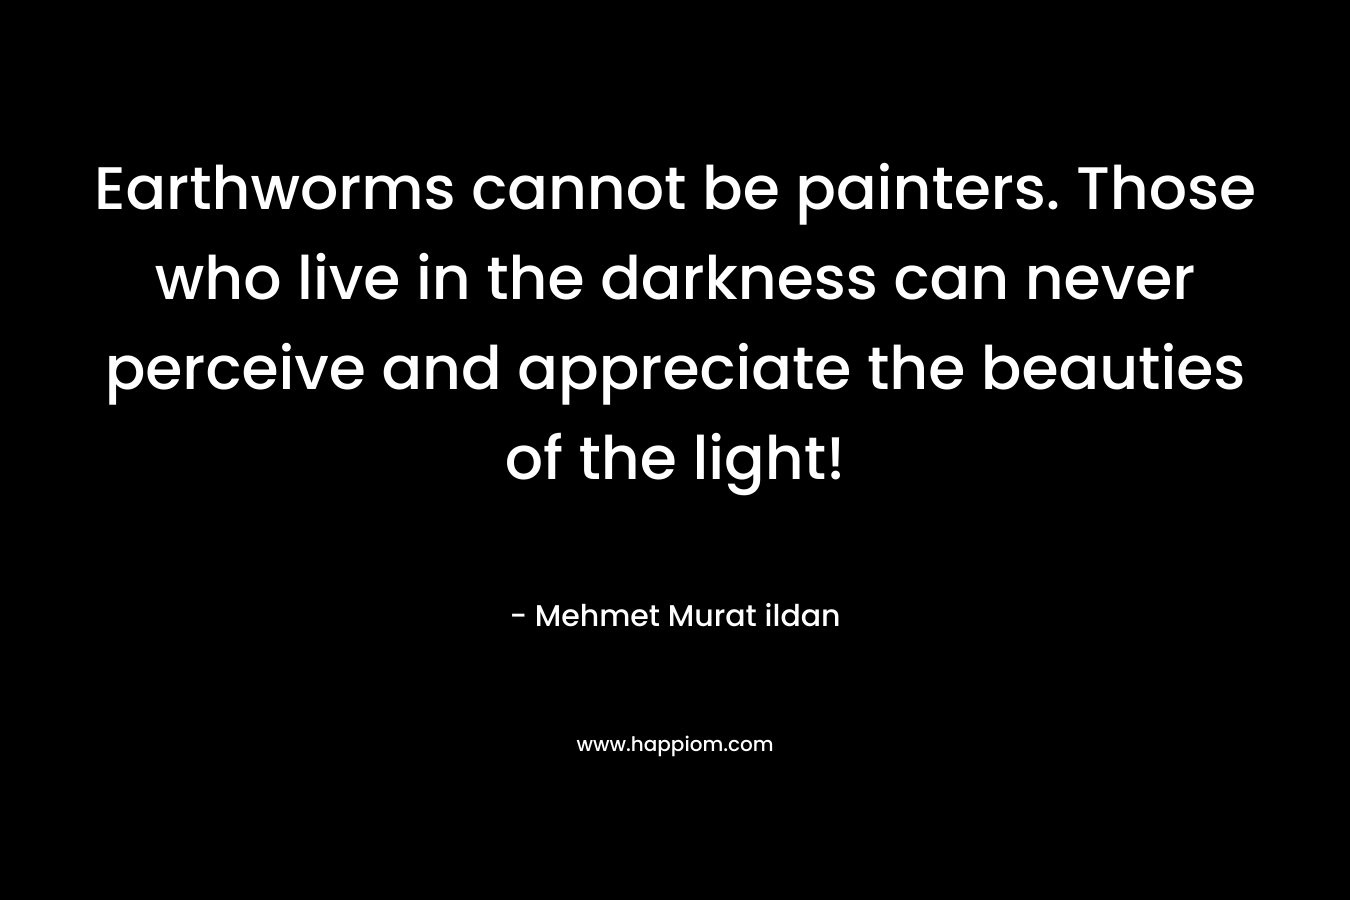 Earthworms cannot be painters. Those who live in the darkness can never perceive and appreciate the beauties of the light! – Mehmet Murat ildan